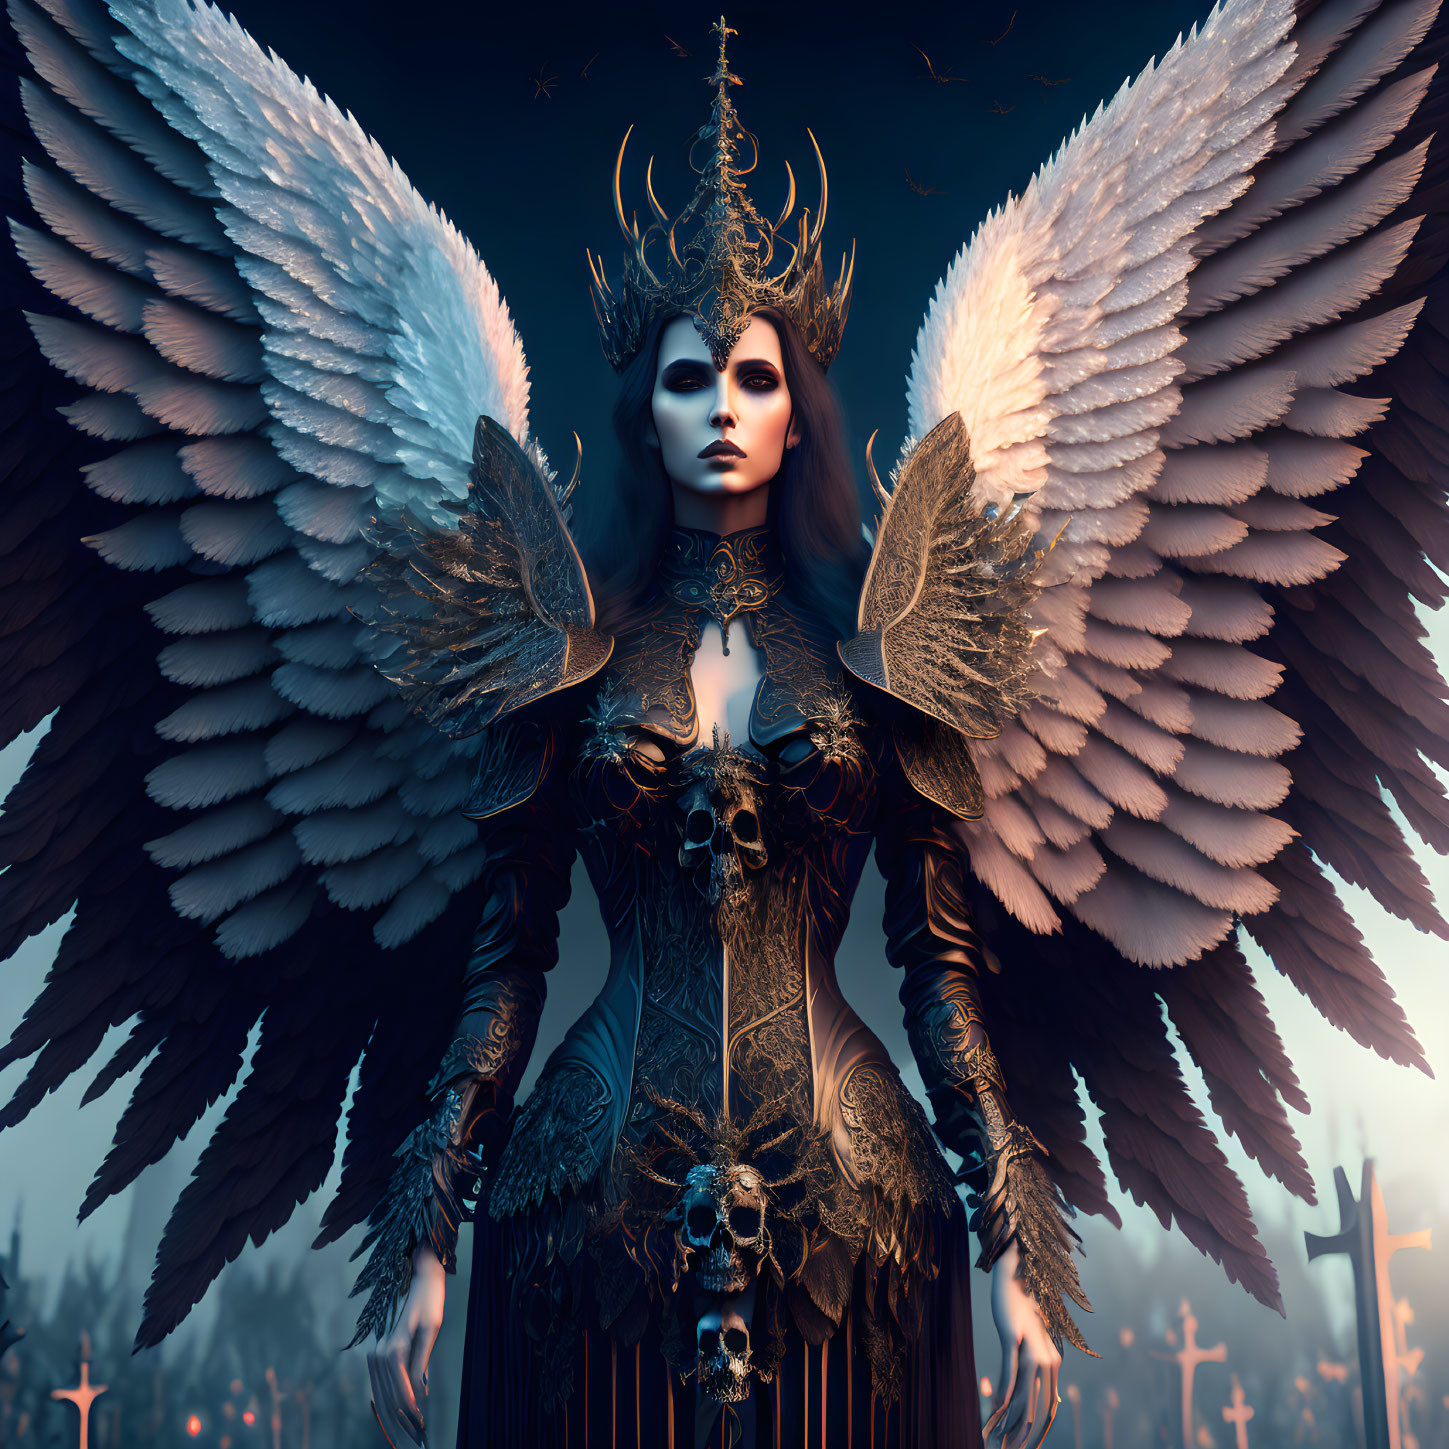 Majestic figure in dark armor with large wings amidst foggy graves